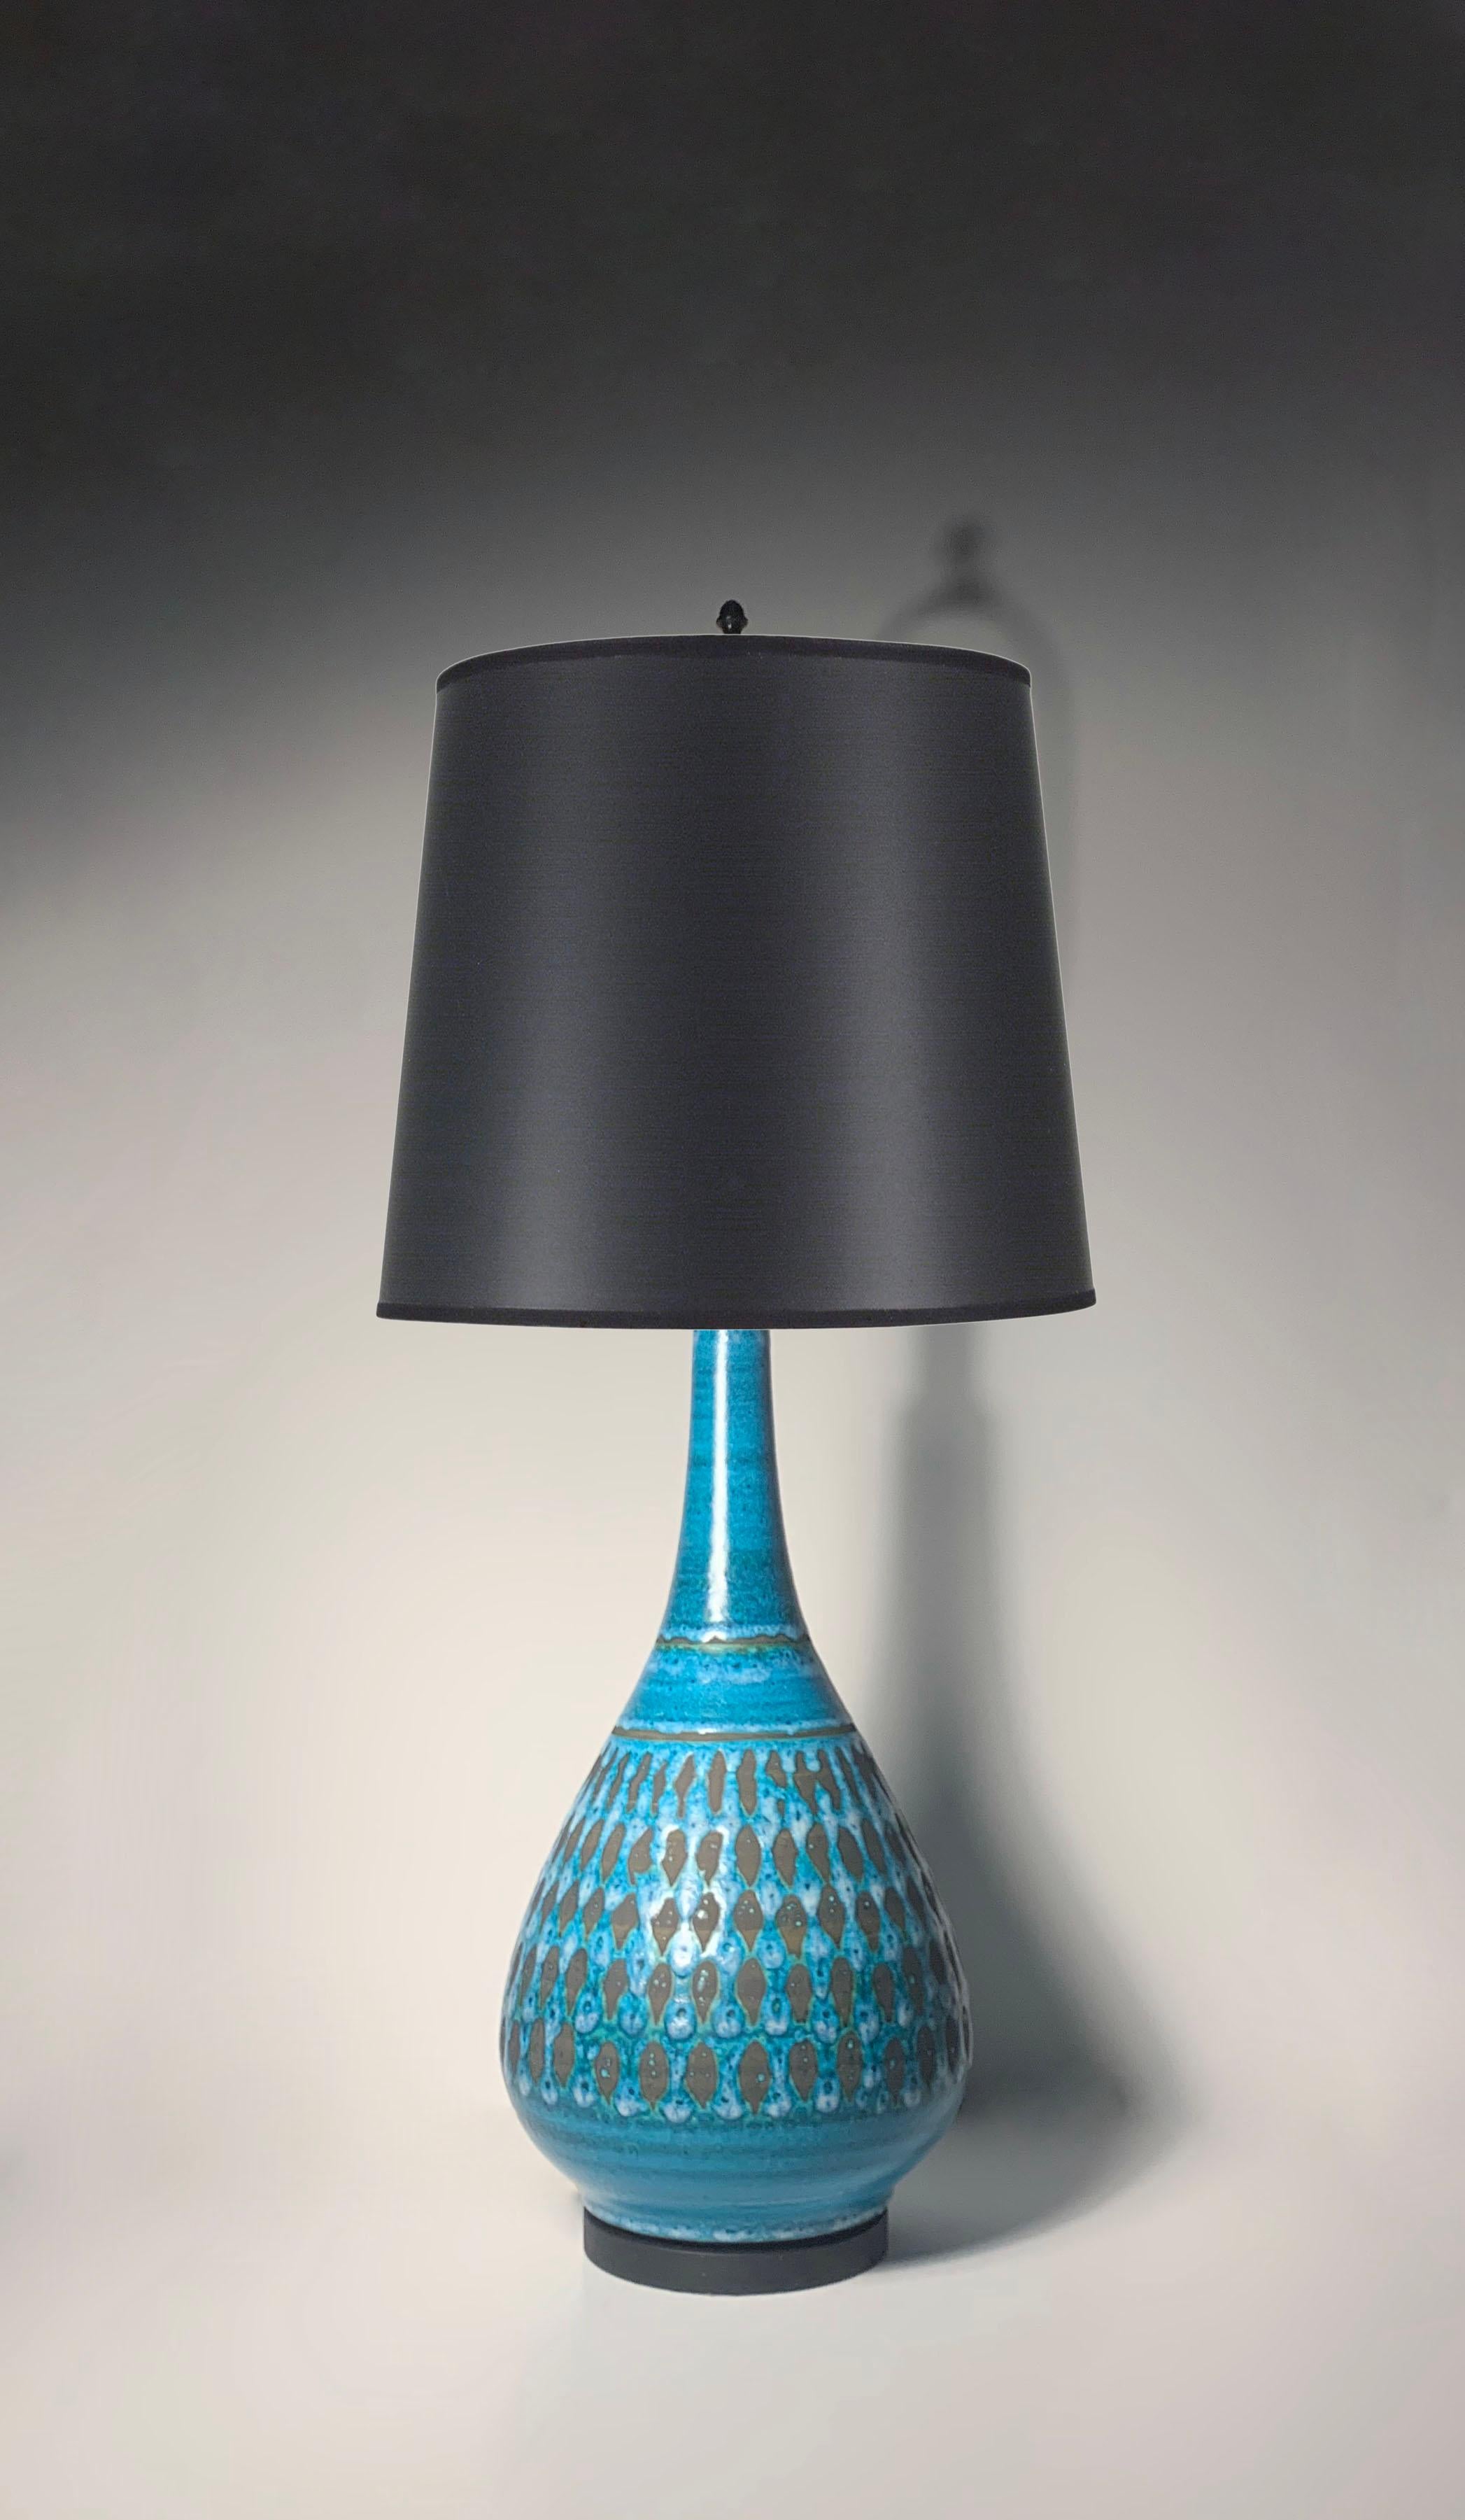 Vintage modern lamp in a beautiful blue color with matt black design. Very much in the manner of Aldo Londi for Bitossi.  Lamp in unmarked. Uncertain of origin whether it is American or possibly Italian.

40.5